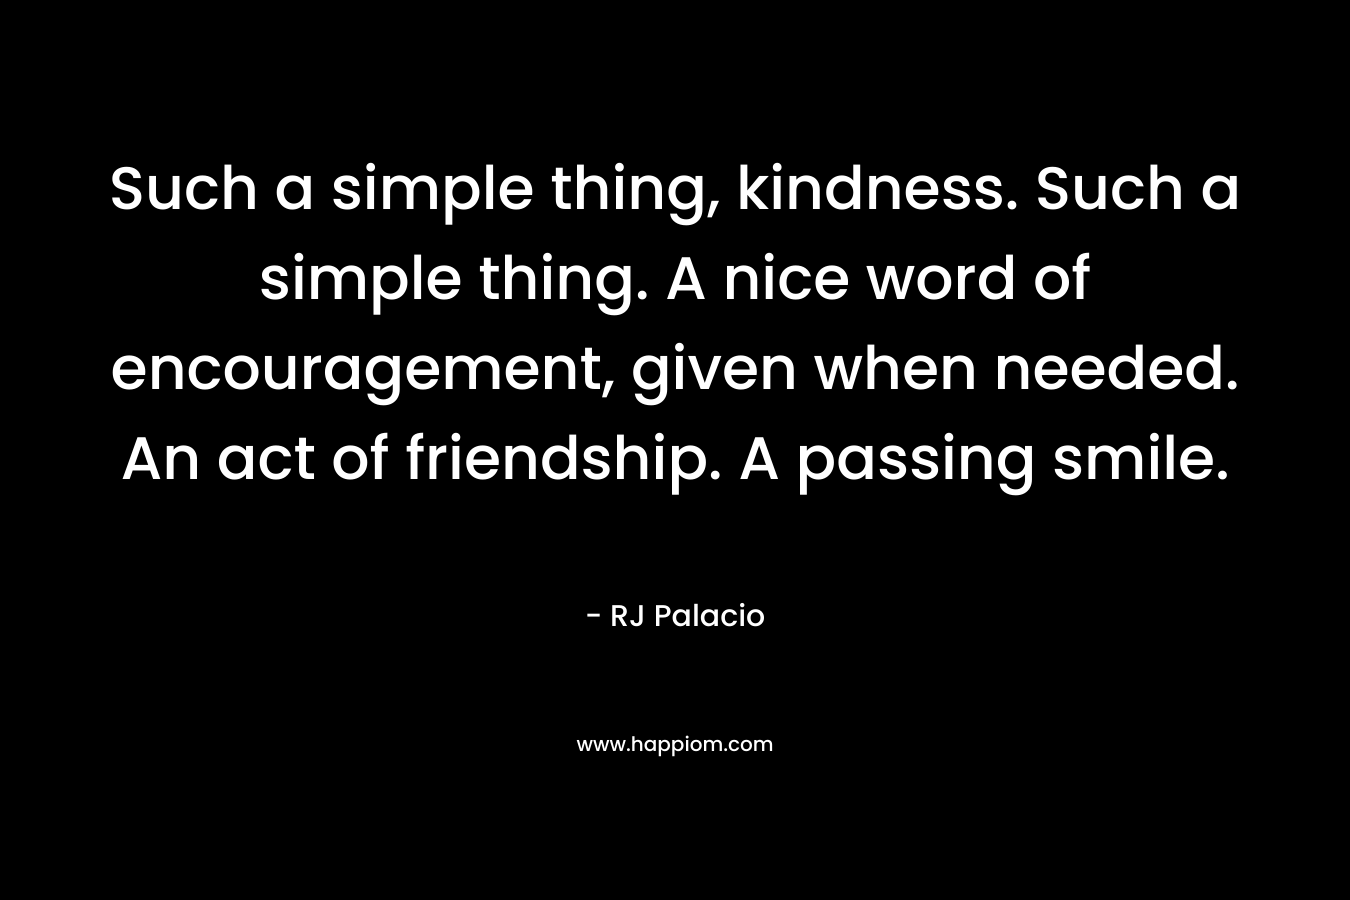 Such a simple thing, kindness. Such a simple thing. A nice word of encouragement, given when needed. An act of friendship. A passing smile.